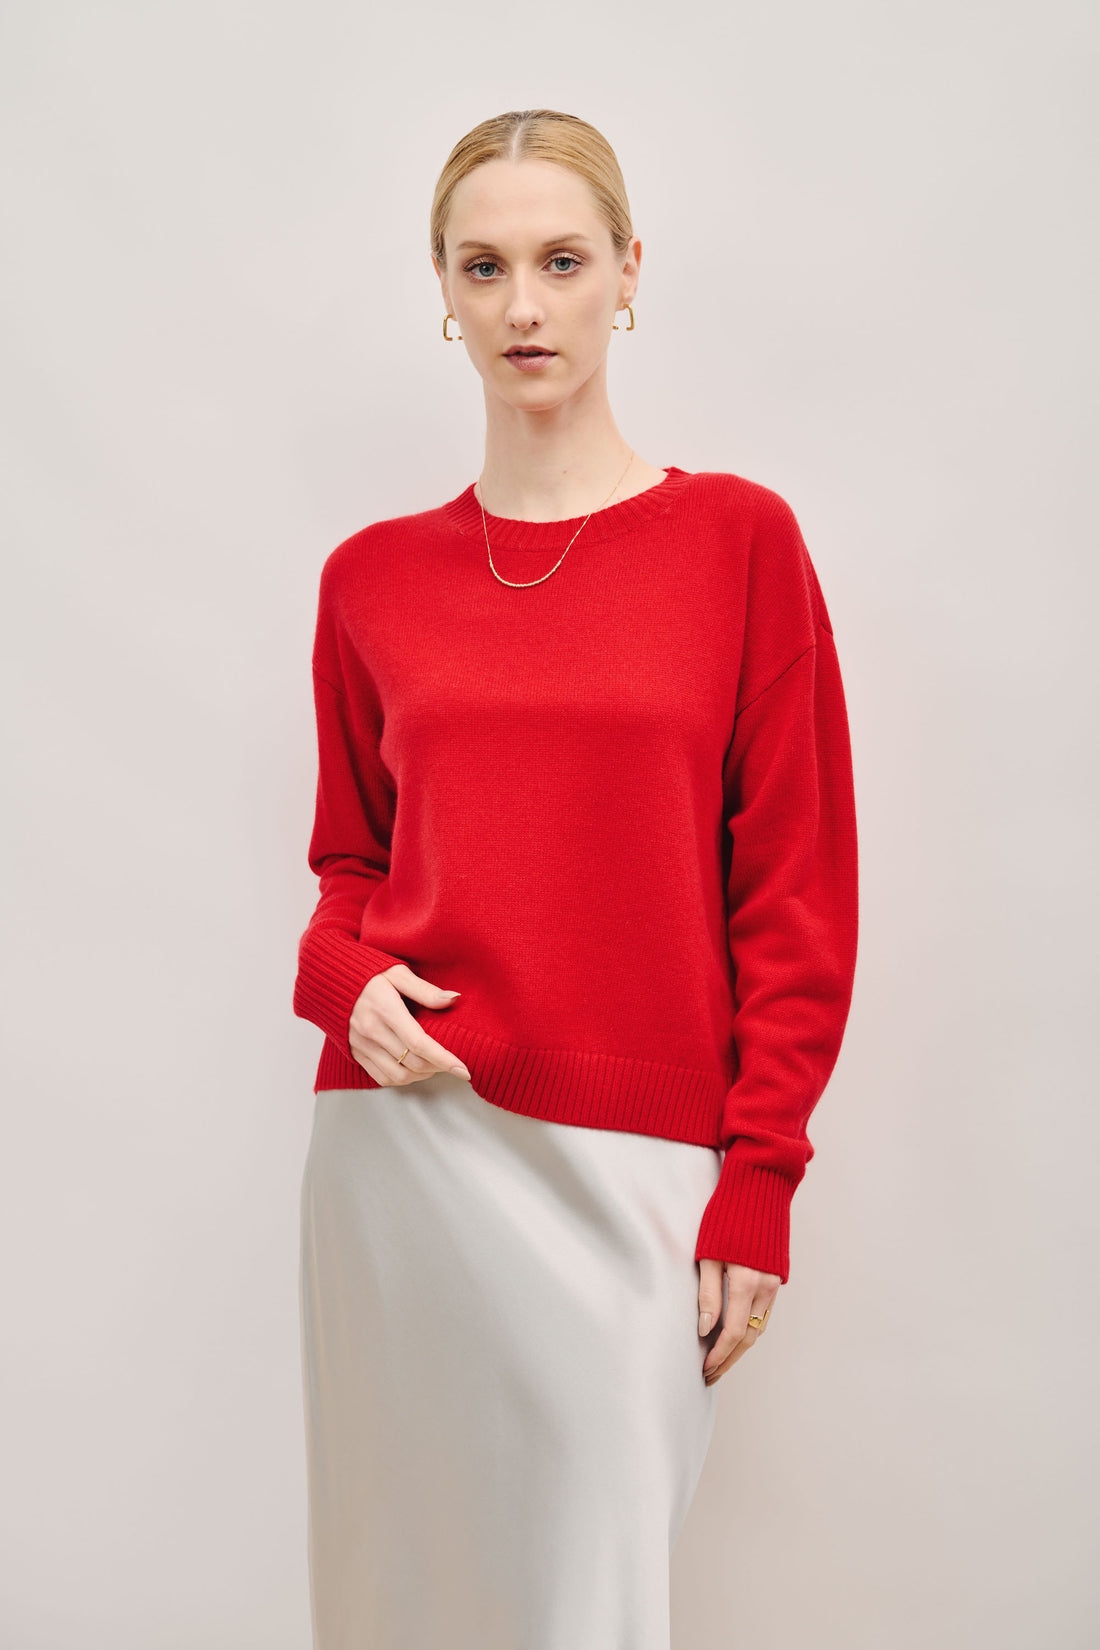 ISABEL cashmere-blended crew neck sweater (Red)